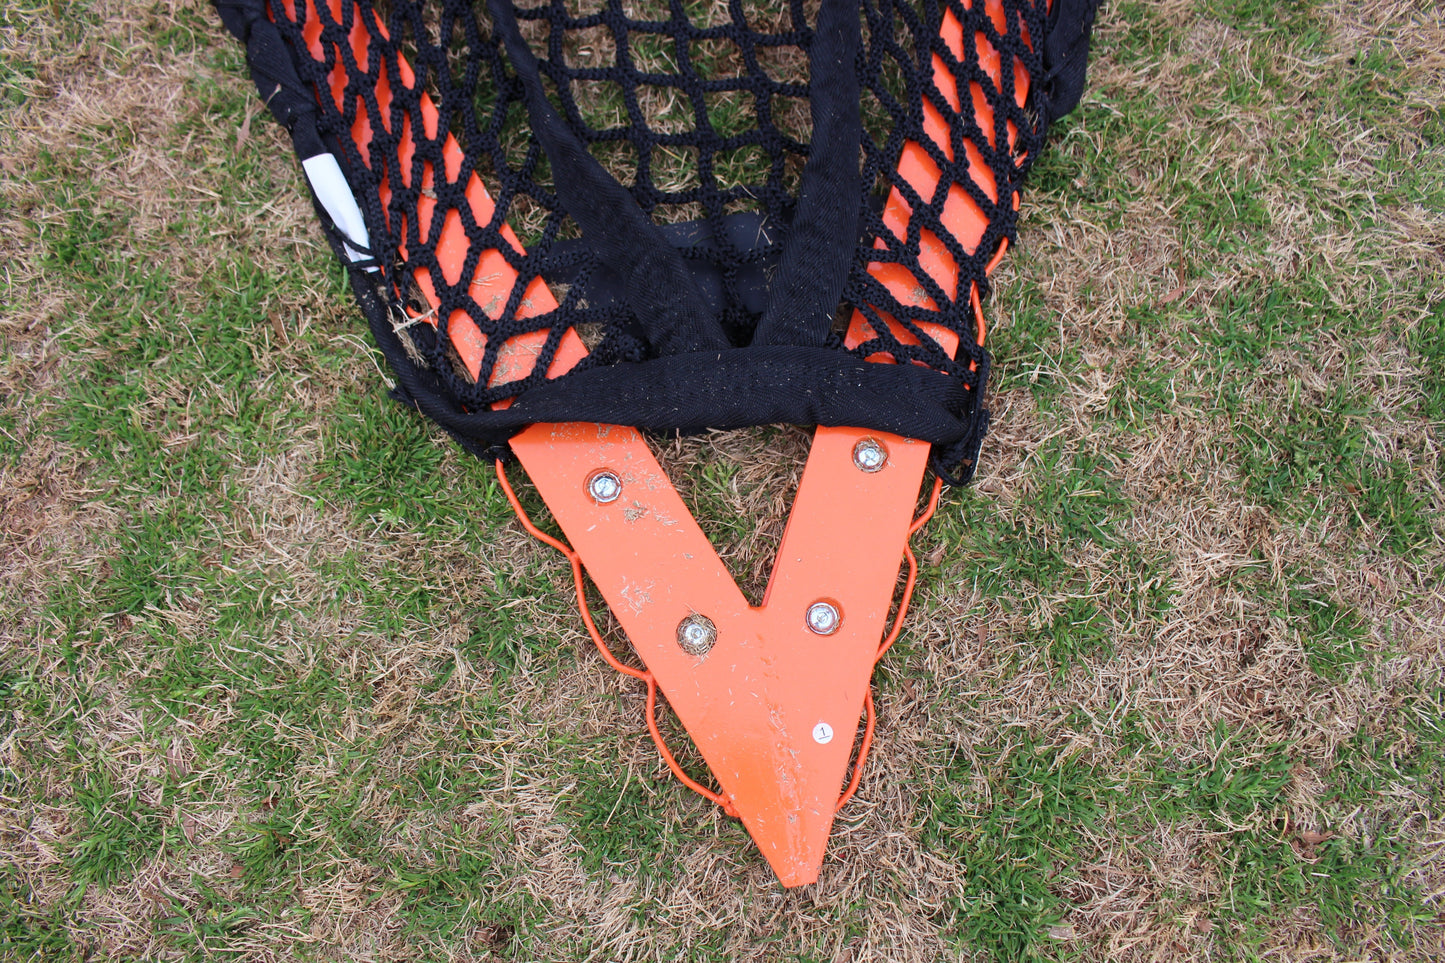 High School/College Game Goal 6'x6'x7' by Crankshooter® 118 lbs. Posts w/ Lacing Rails & Flat Iron Base, Heavy 6mm or 7mm WHITE Net Included - Free Shipping